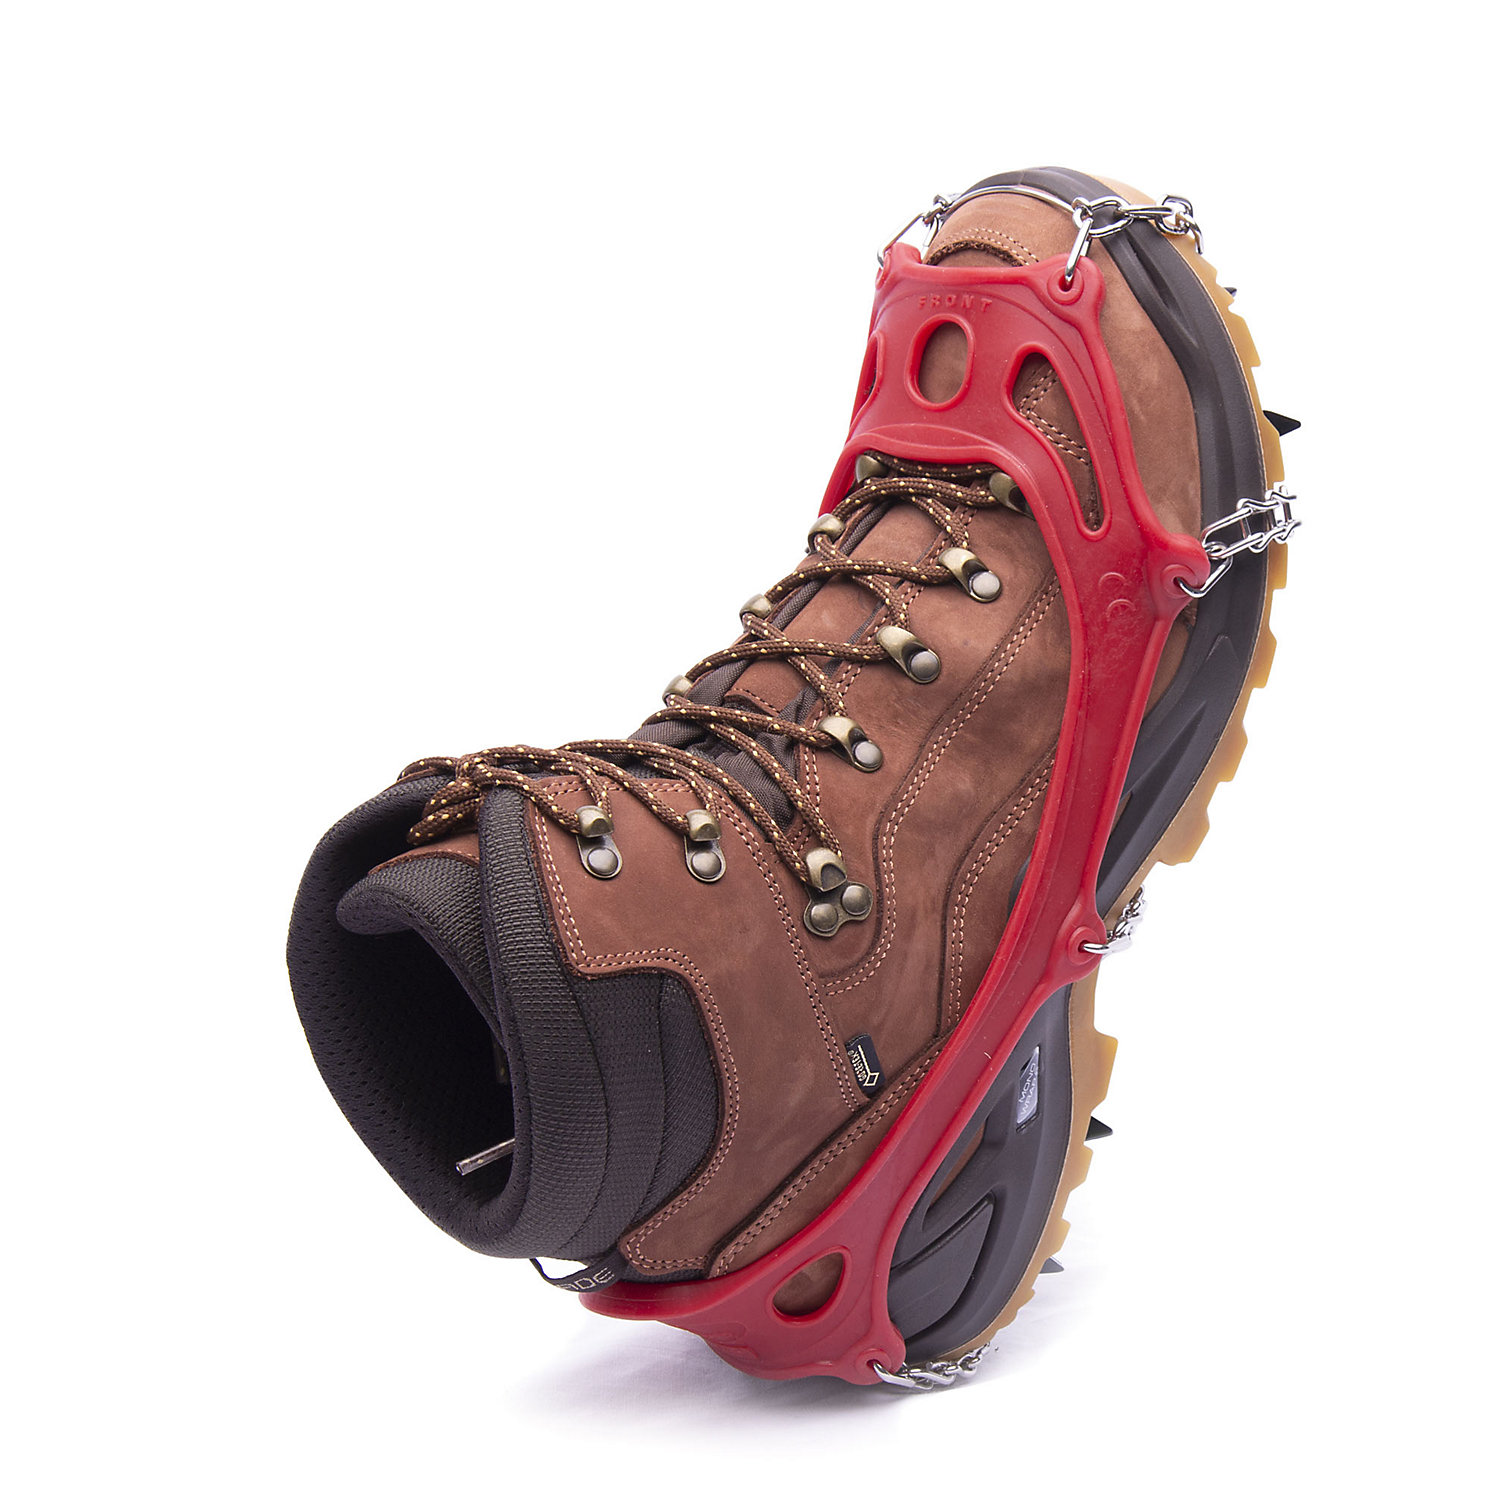 Hillsound Trail Crampon Traction Device 